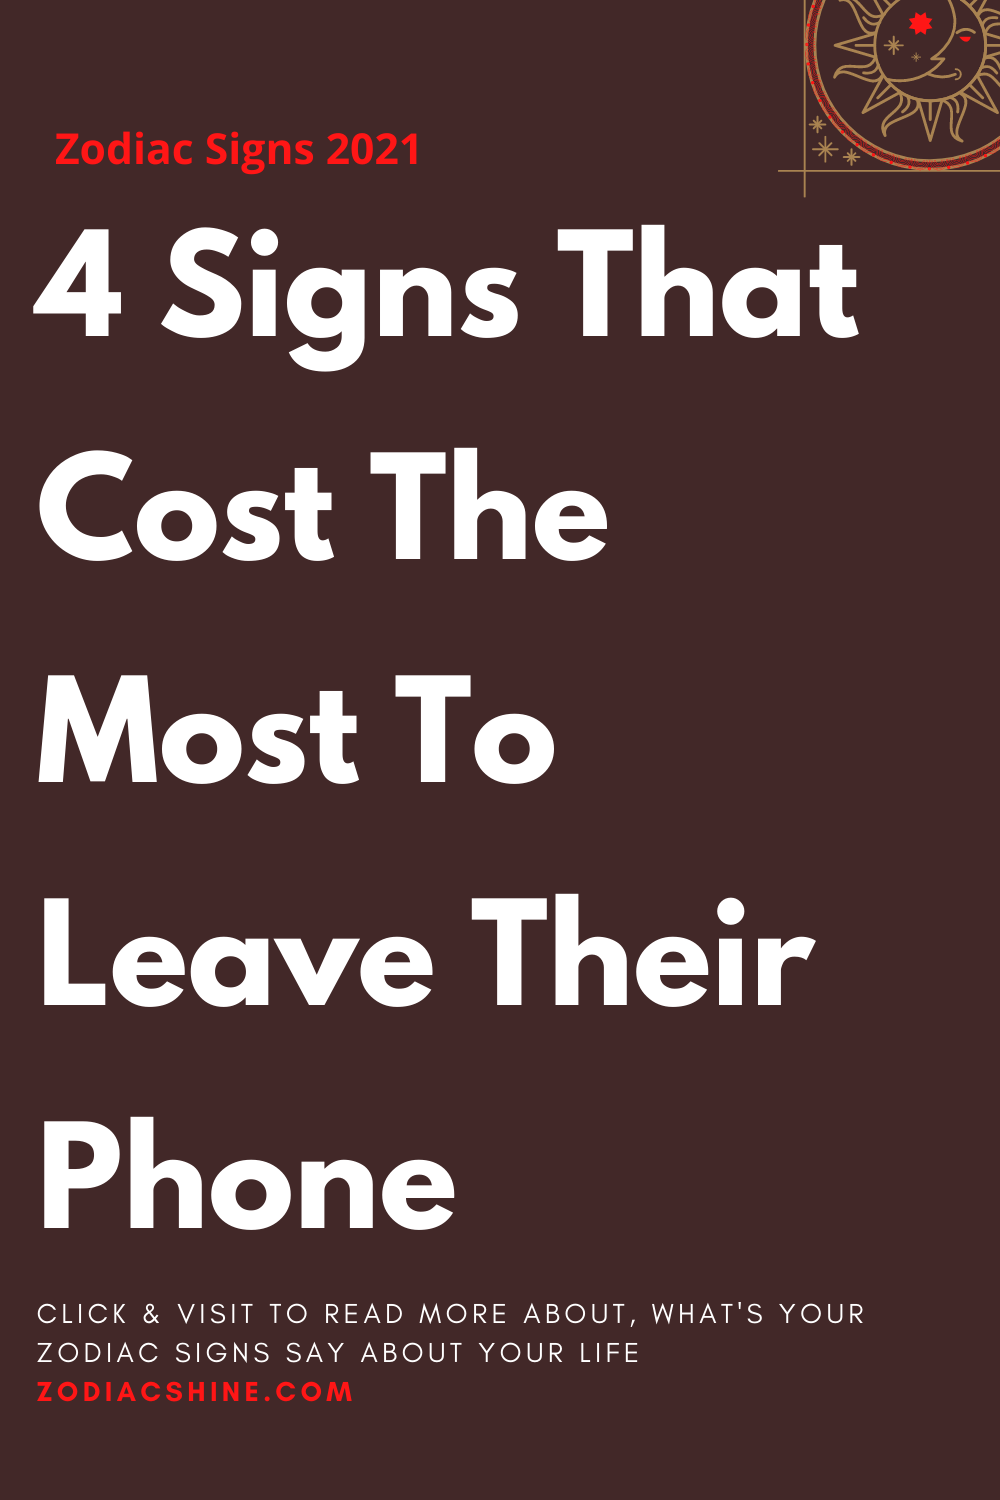 4 Signs That Cost The Most To Leave Their Phone